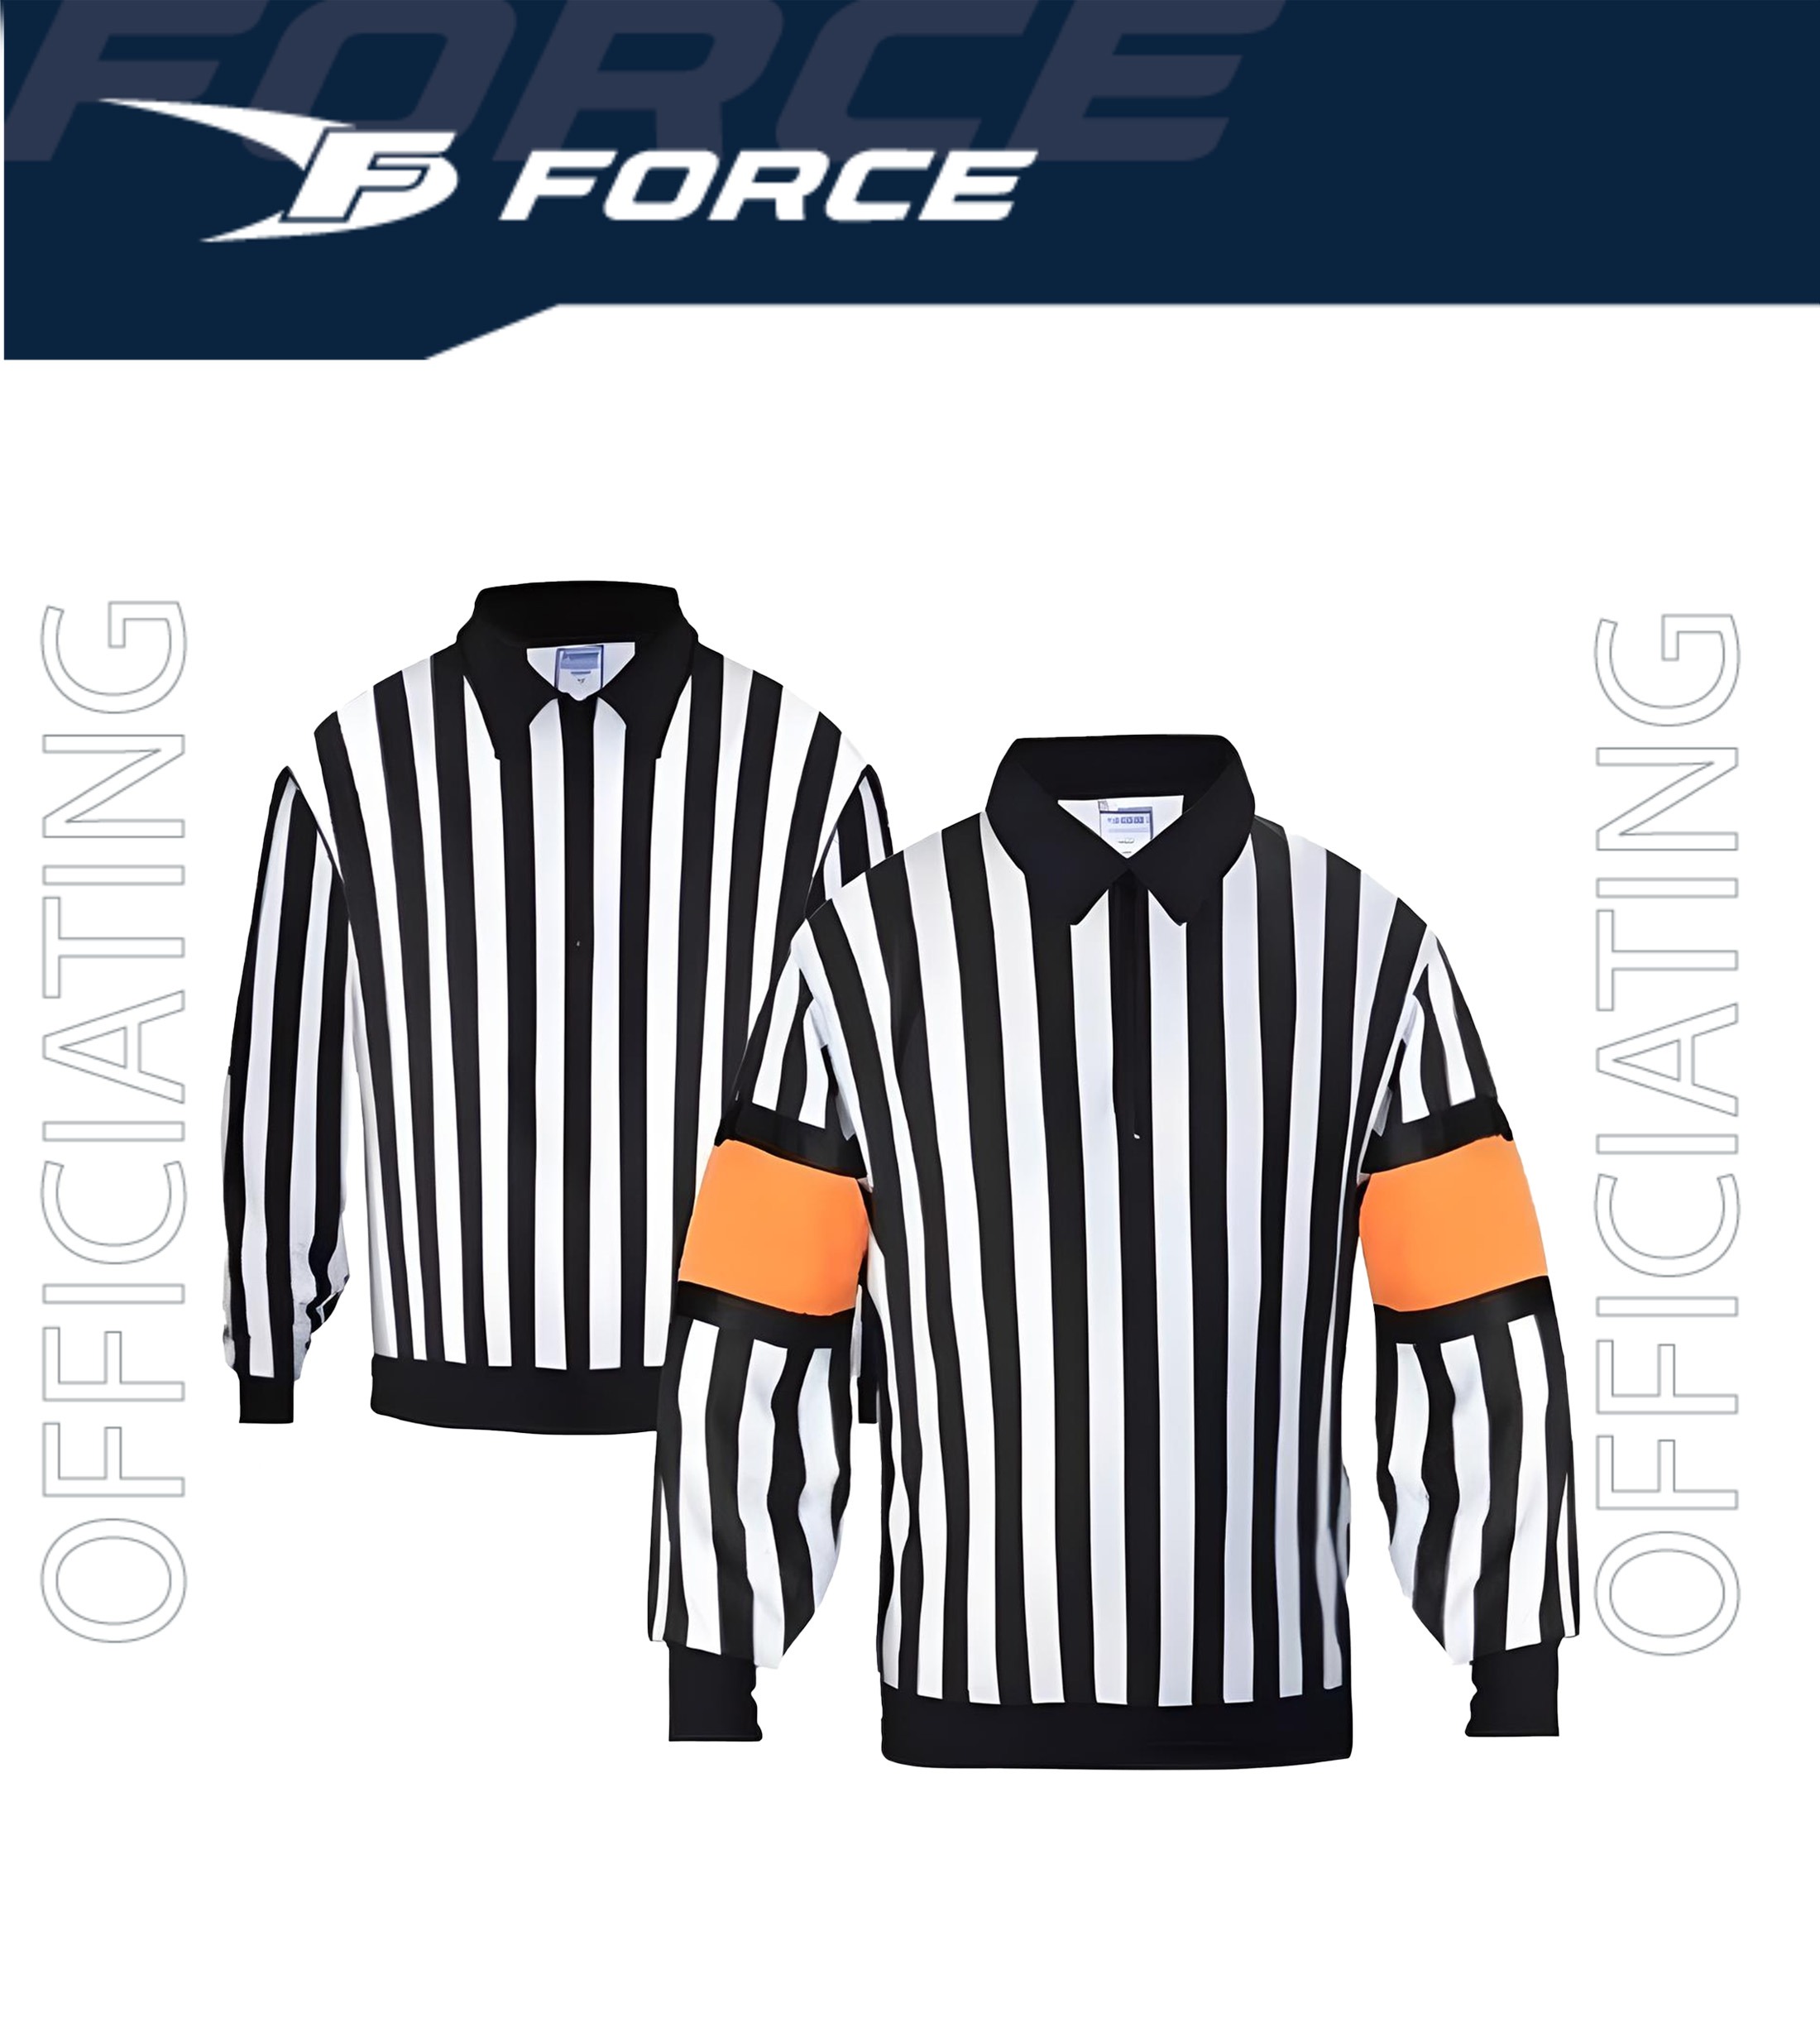 Force Sports / Officiating: Equipment designed by Officials for